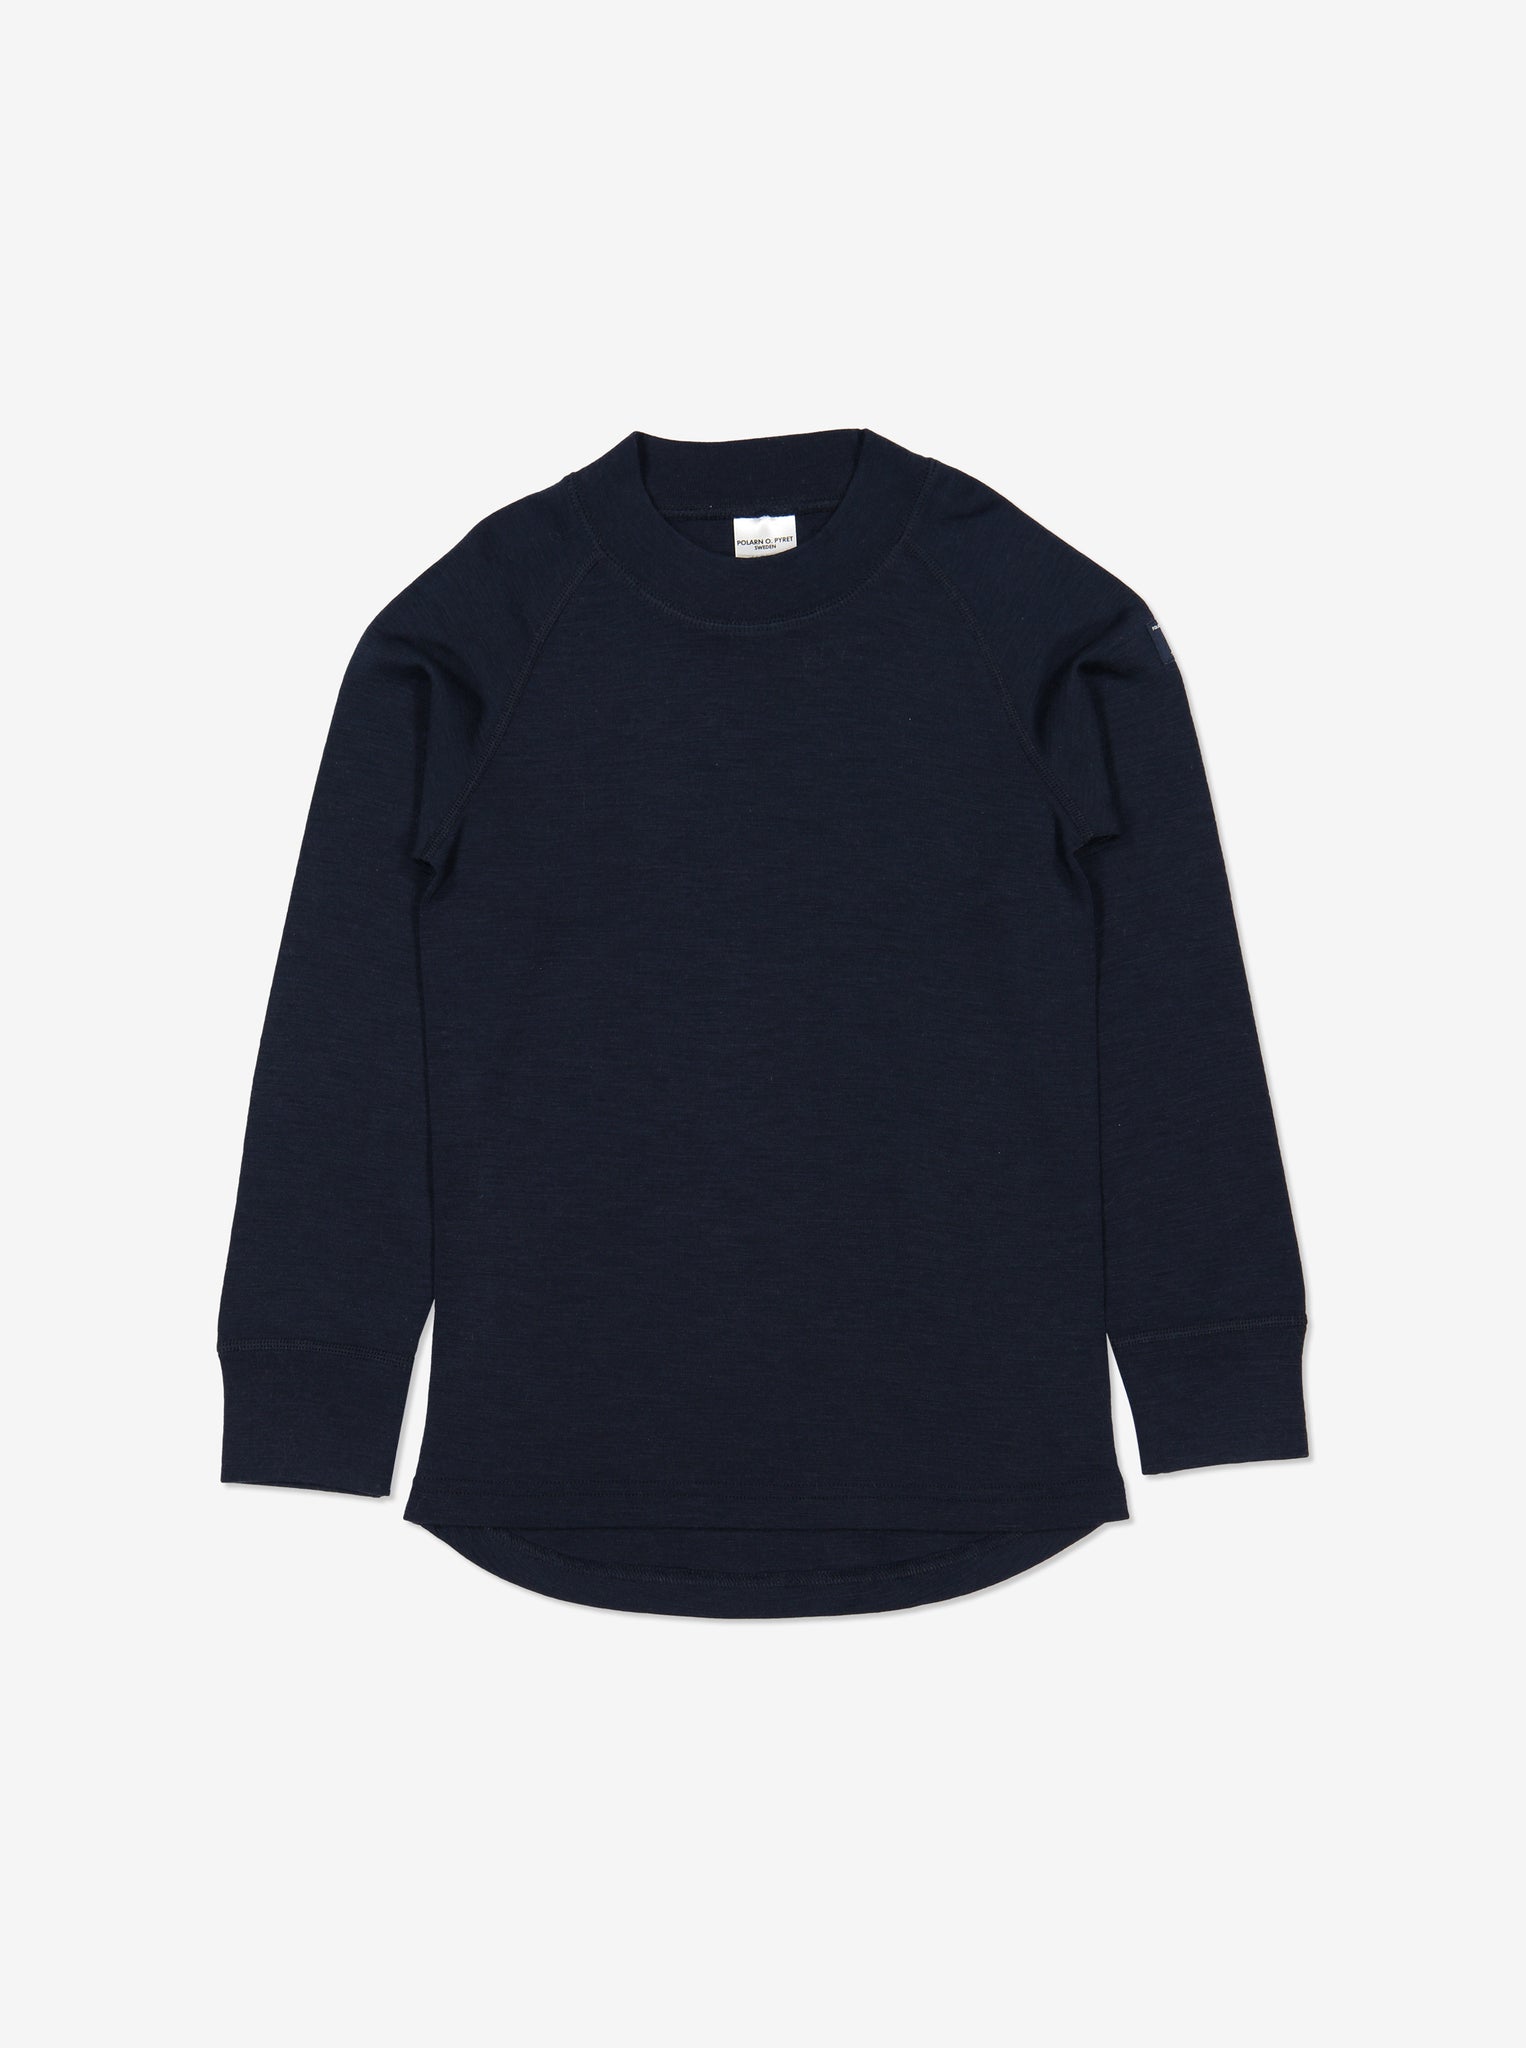 kids merino wool top navy, warm and comfortable, ethical and long lasting polarn o. pyret